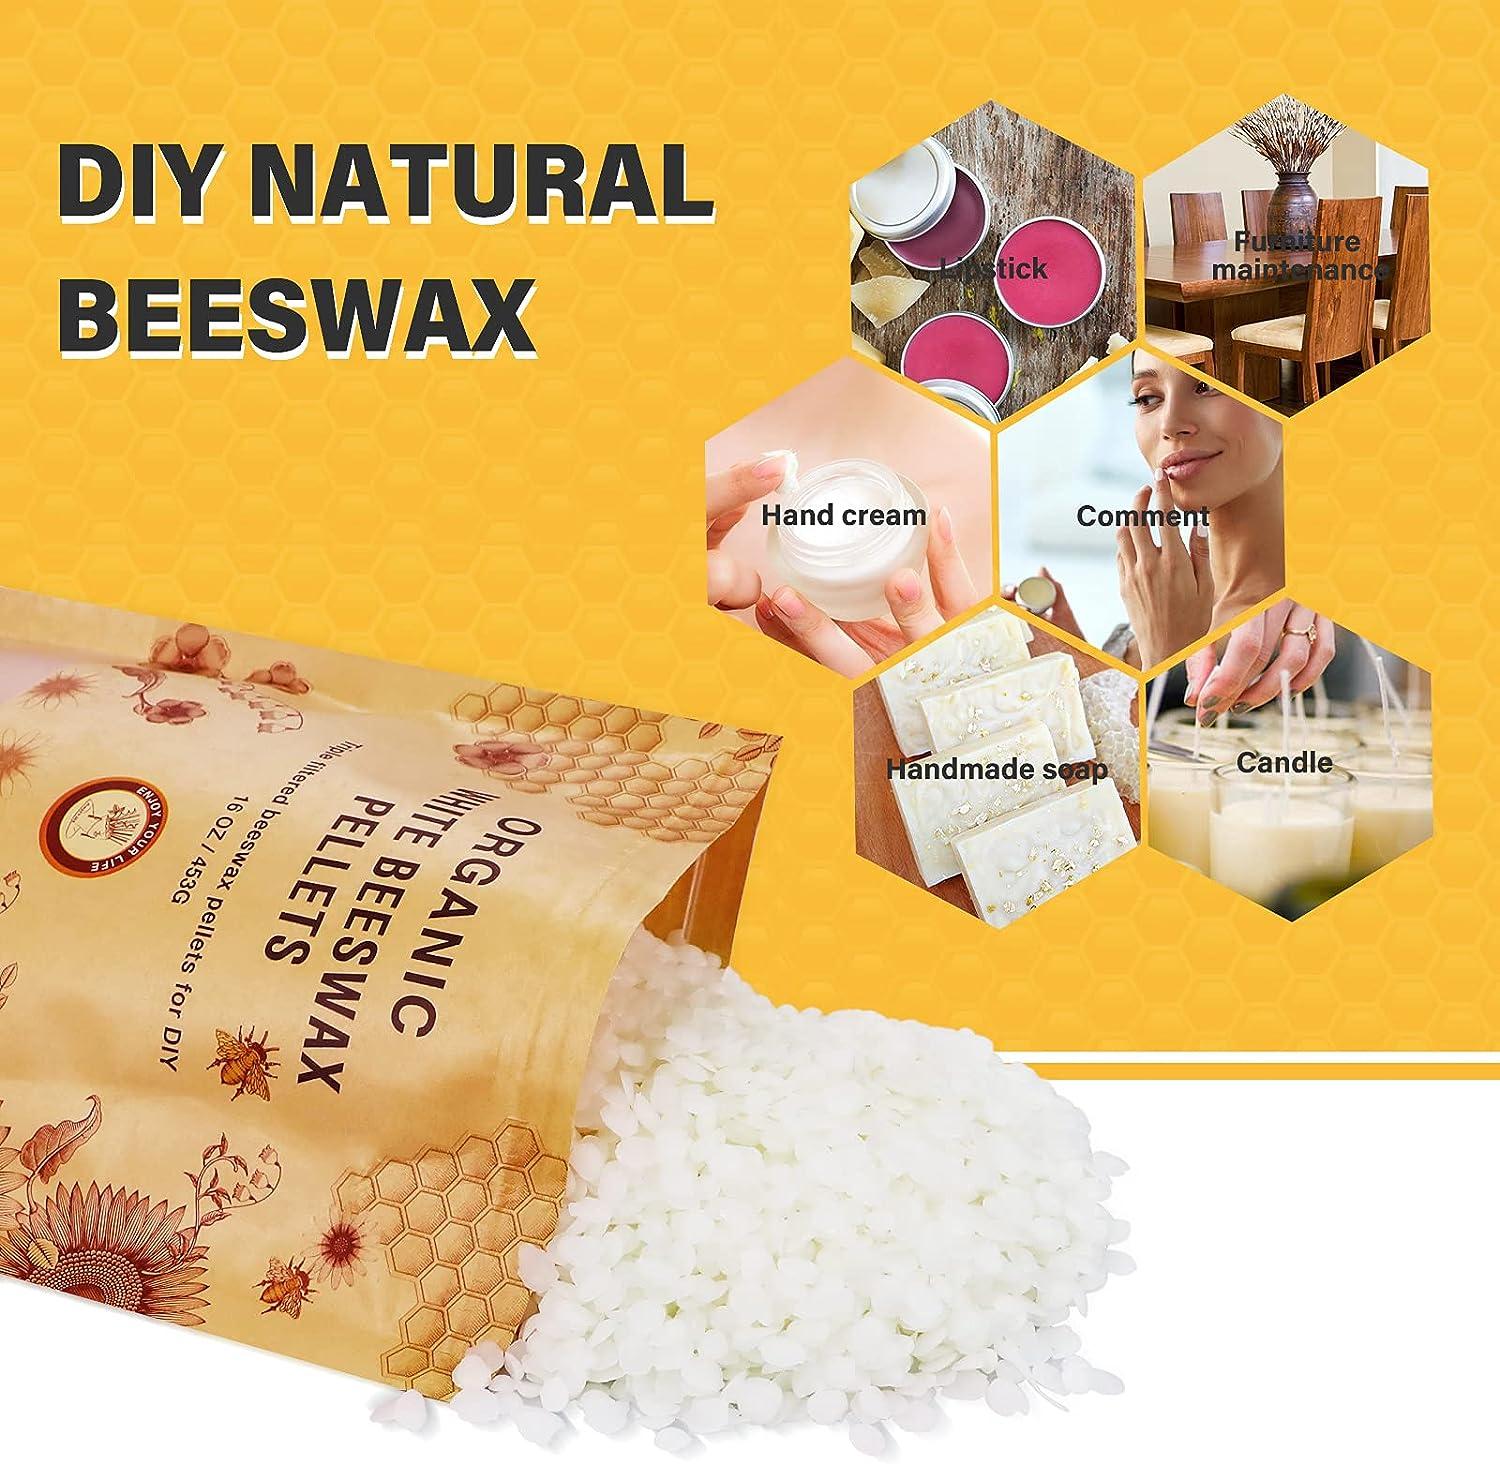 Beeswax Pellets Organic, White Organic Beeswax Flakes 2 lb, Bees